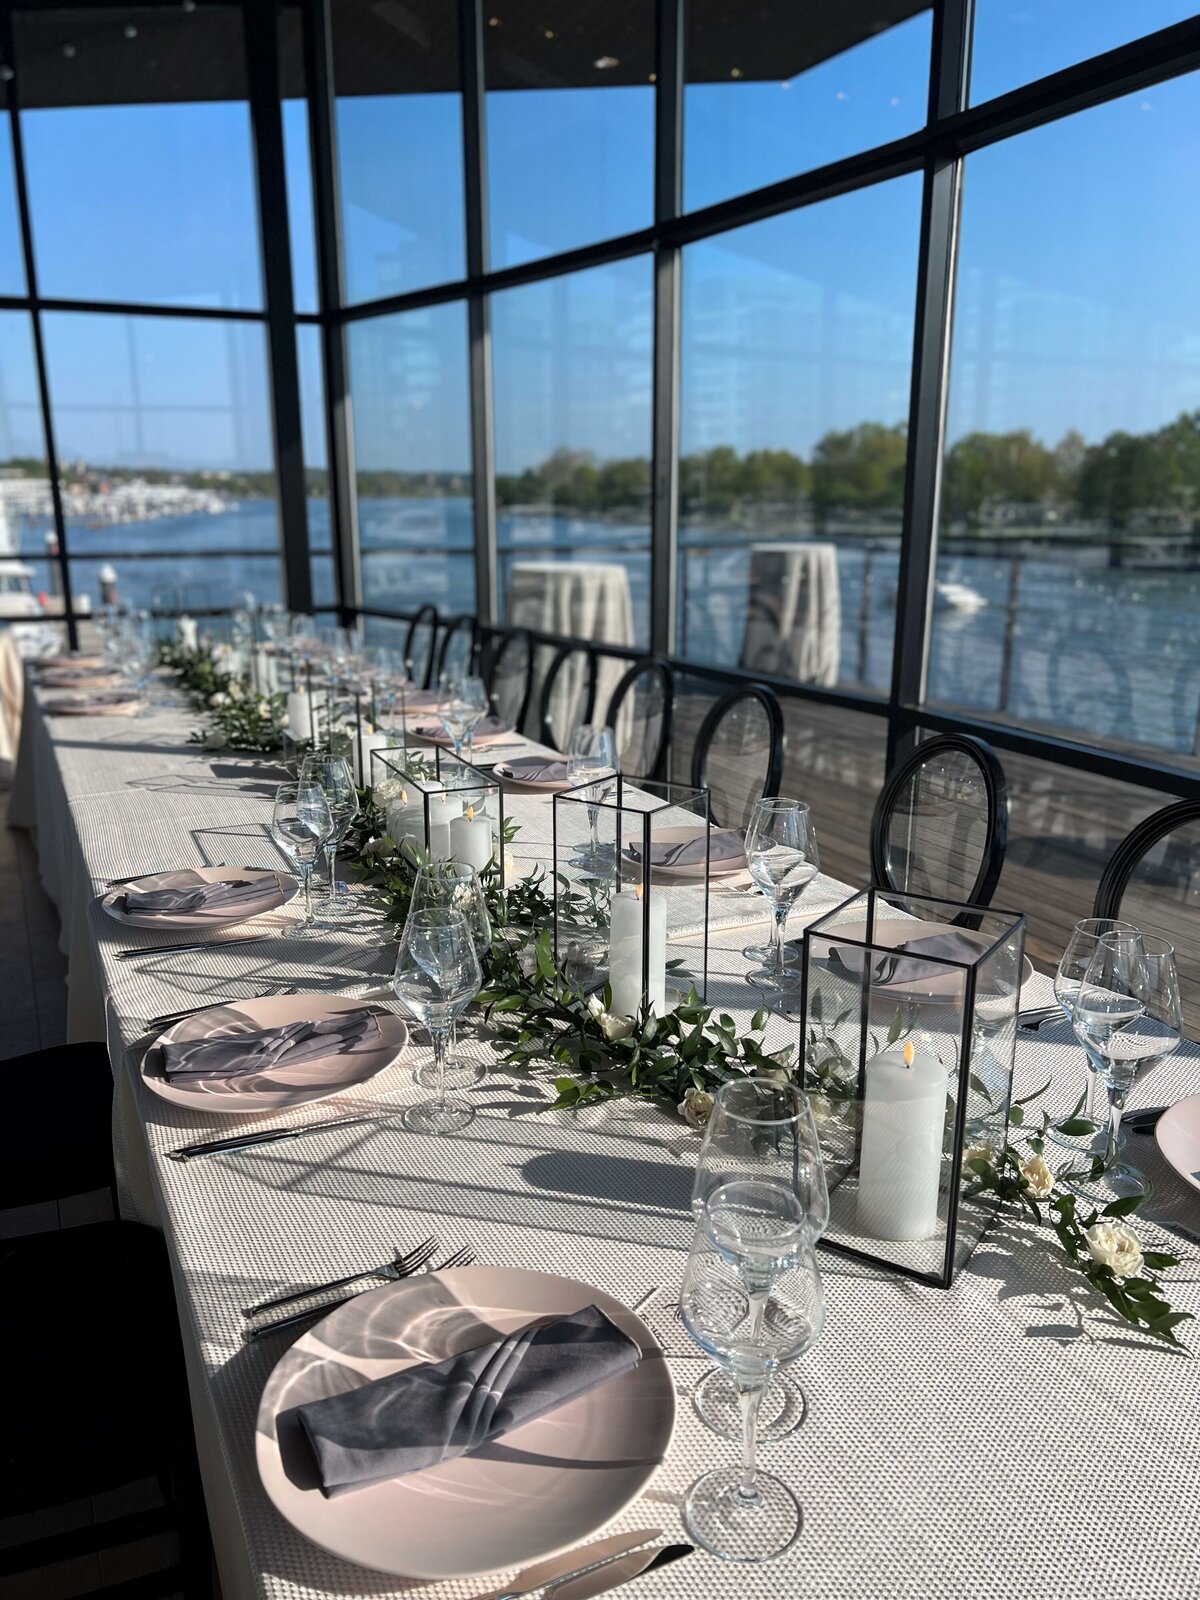 Event-Planning-DC-Wedding-Tablescape-Reception-Dockmaster-Bldg-The-Wharf-DC-EPDC-Photo-